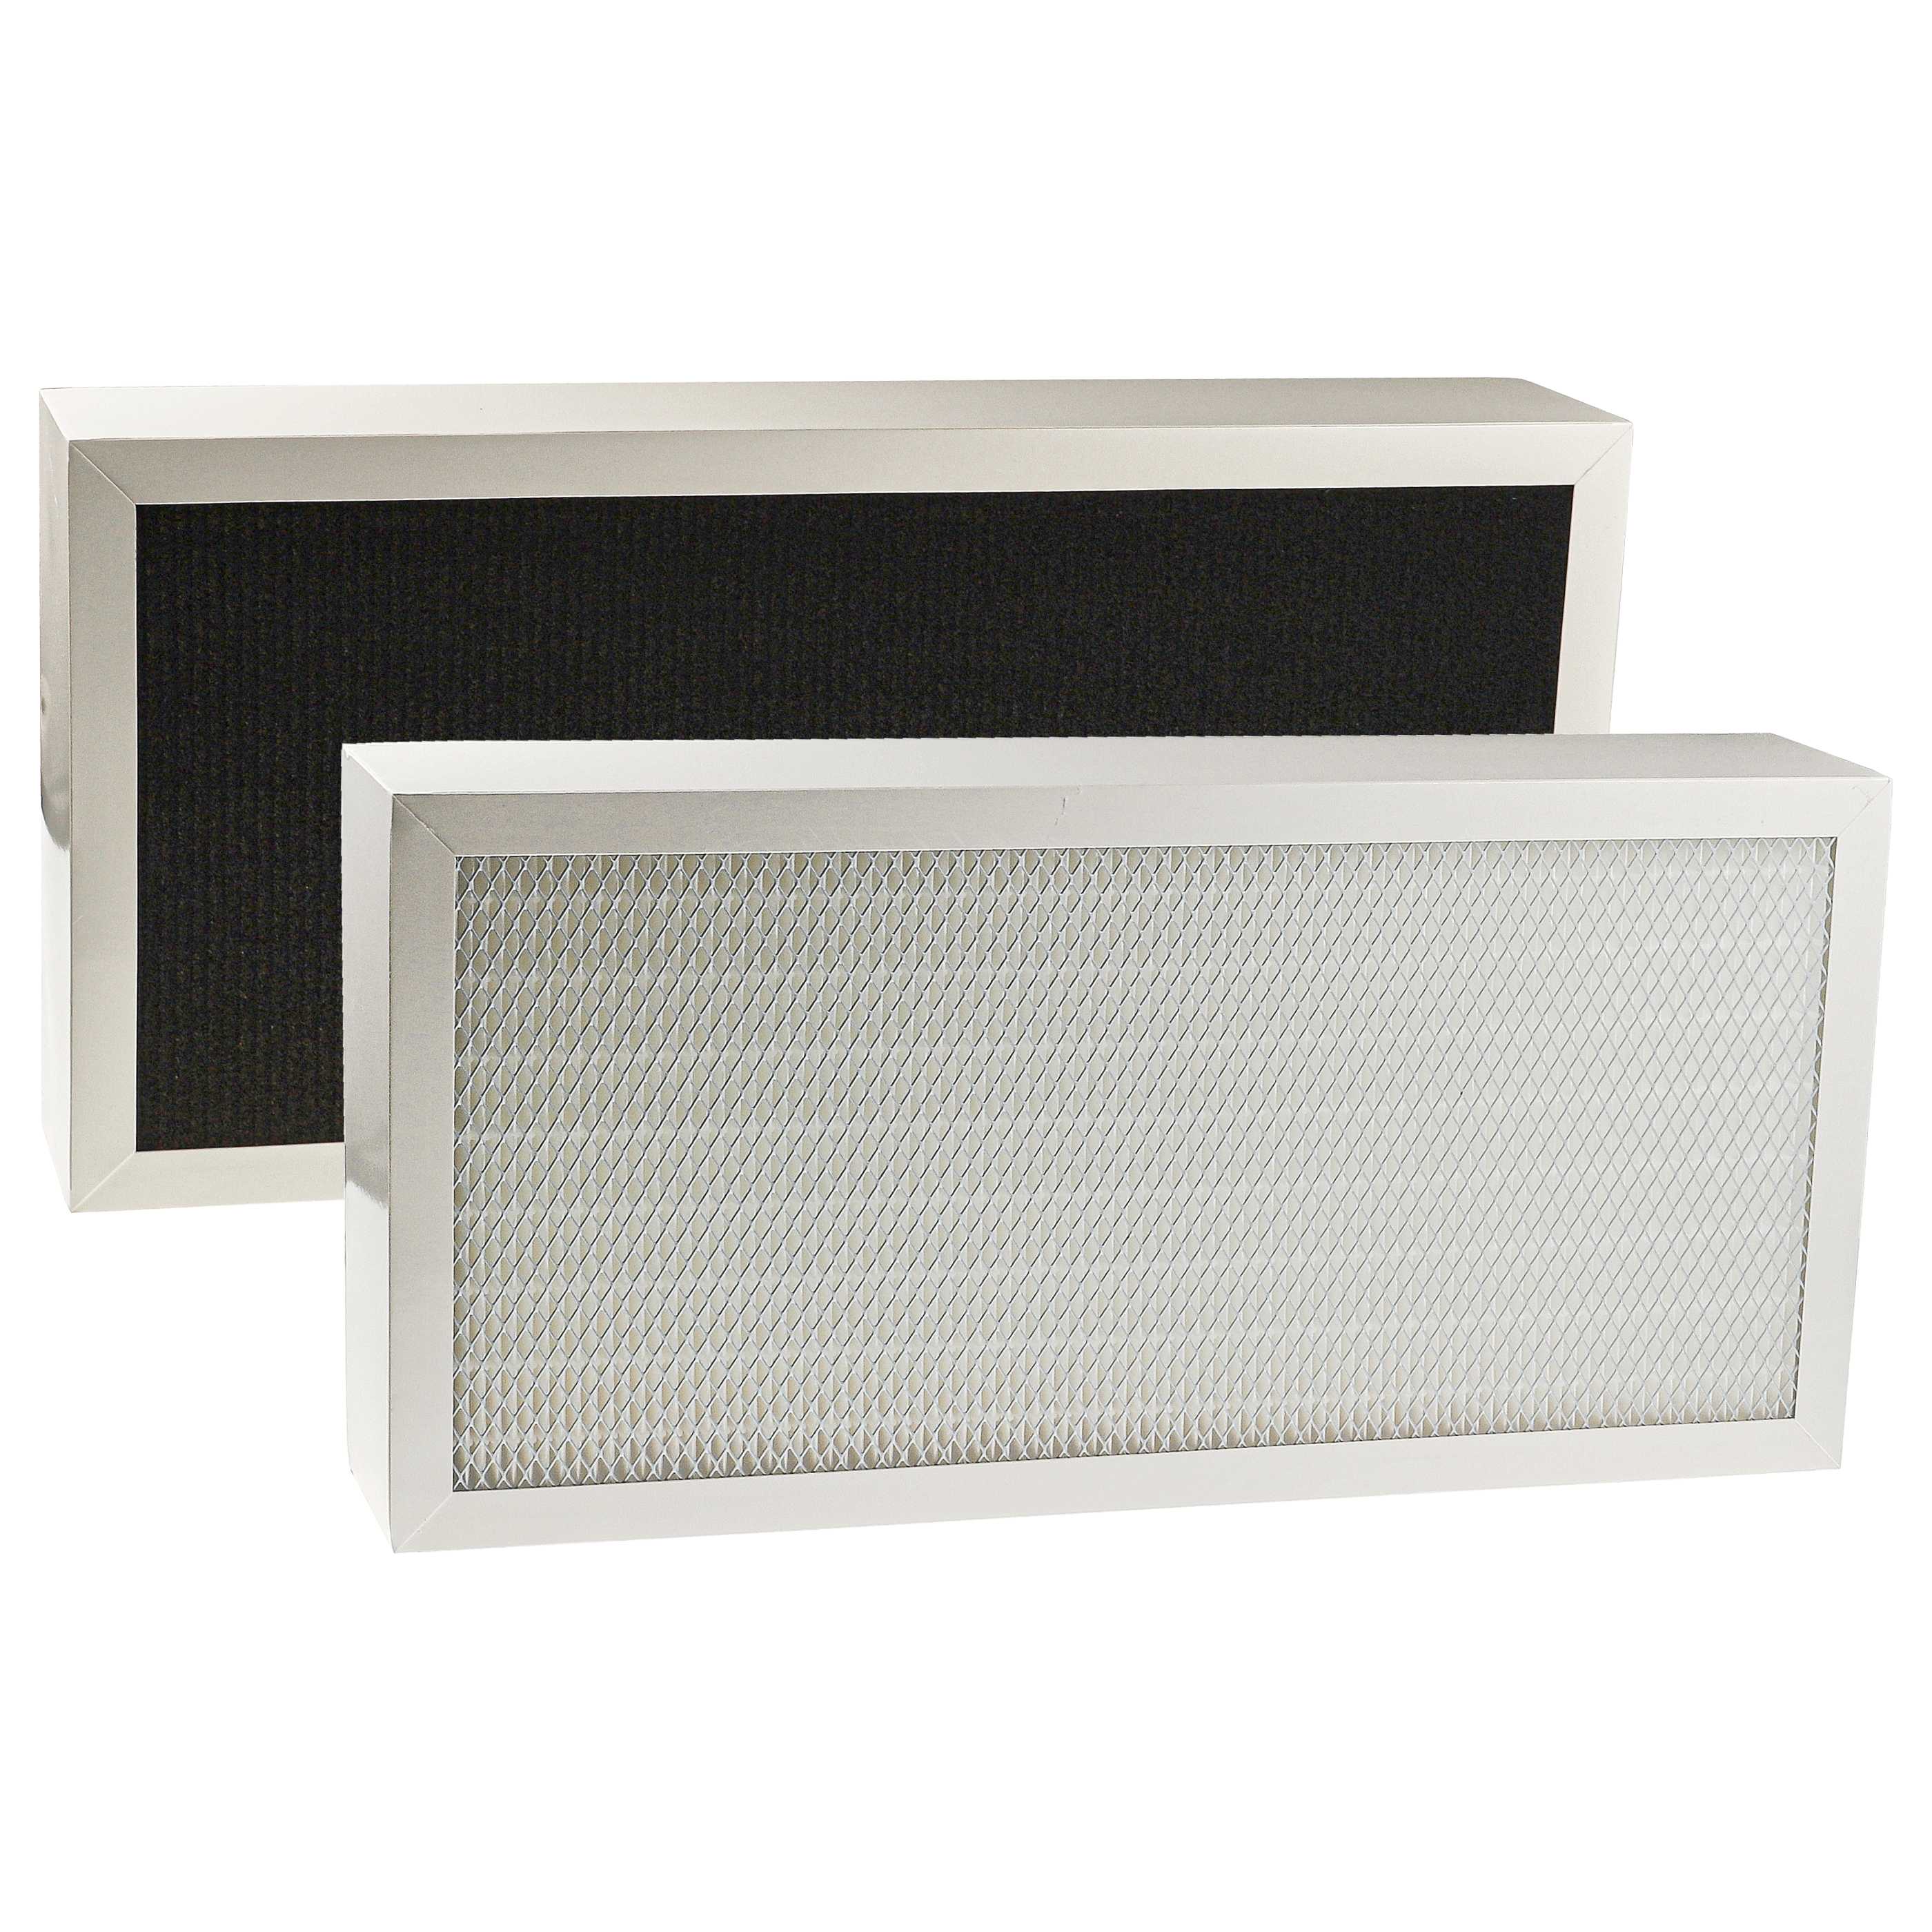 2 Part Filter Set replaces Blueair F400PA for Air Purifier - HEPA filter, activated carbon filter